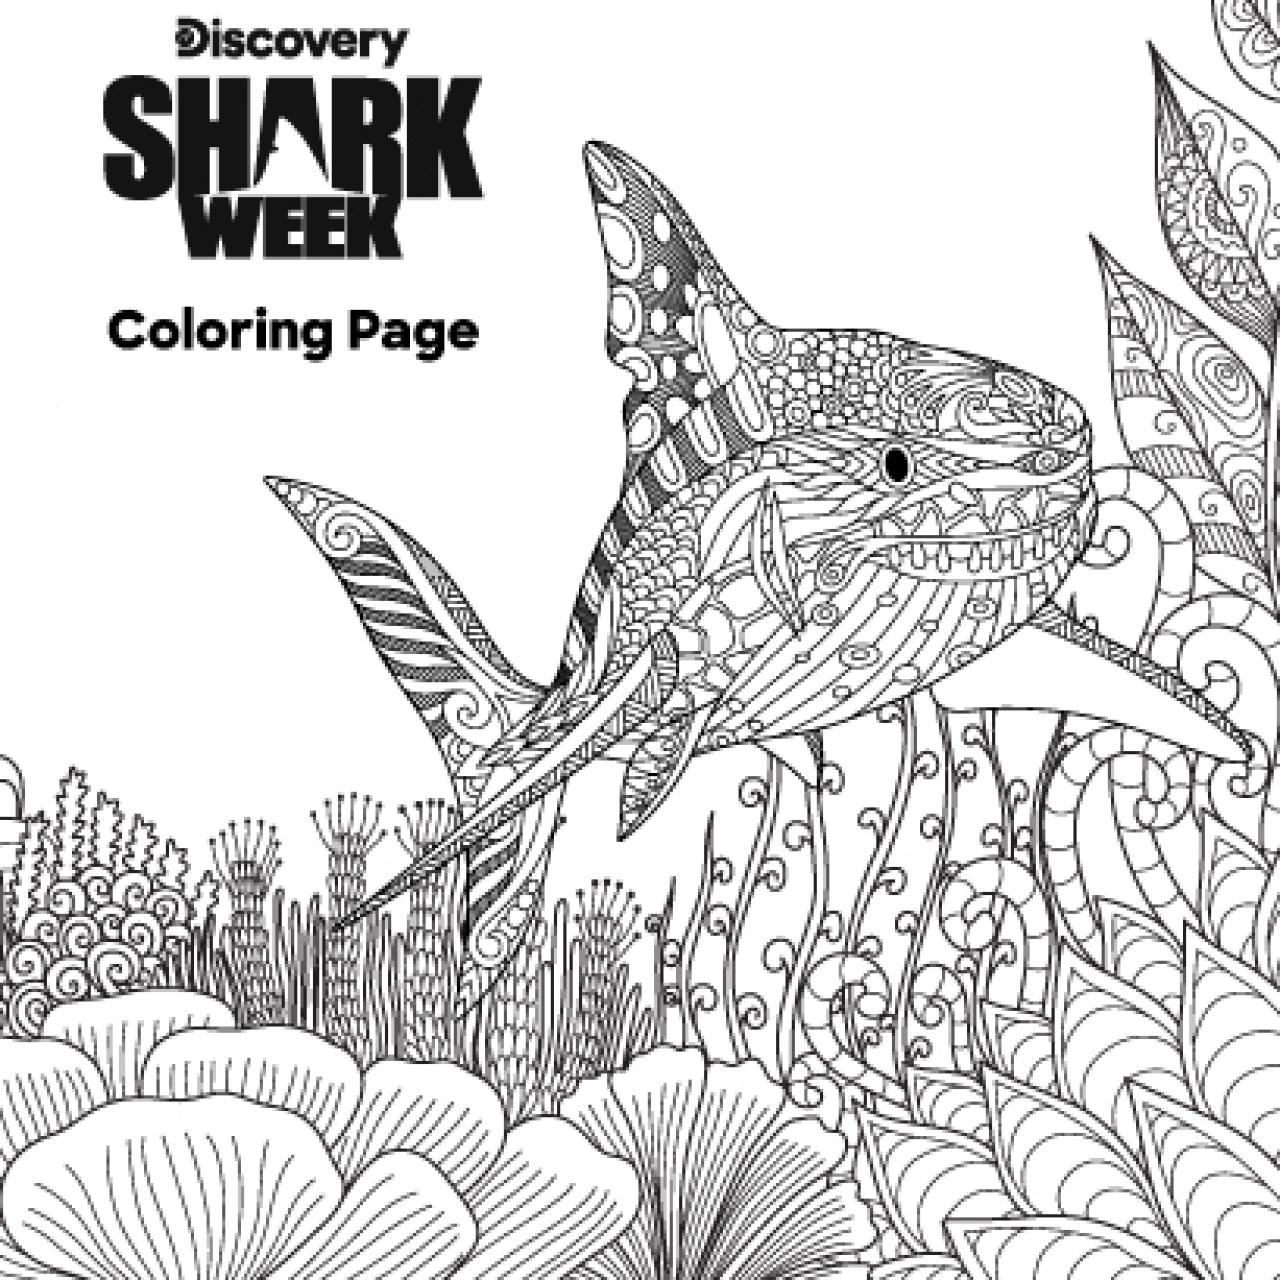 Shark Week Coloring Page The Latest Shark Week 2023 News on Discovery